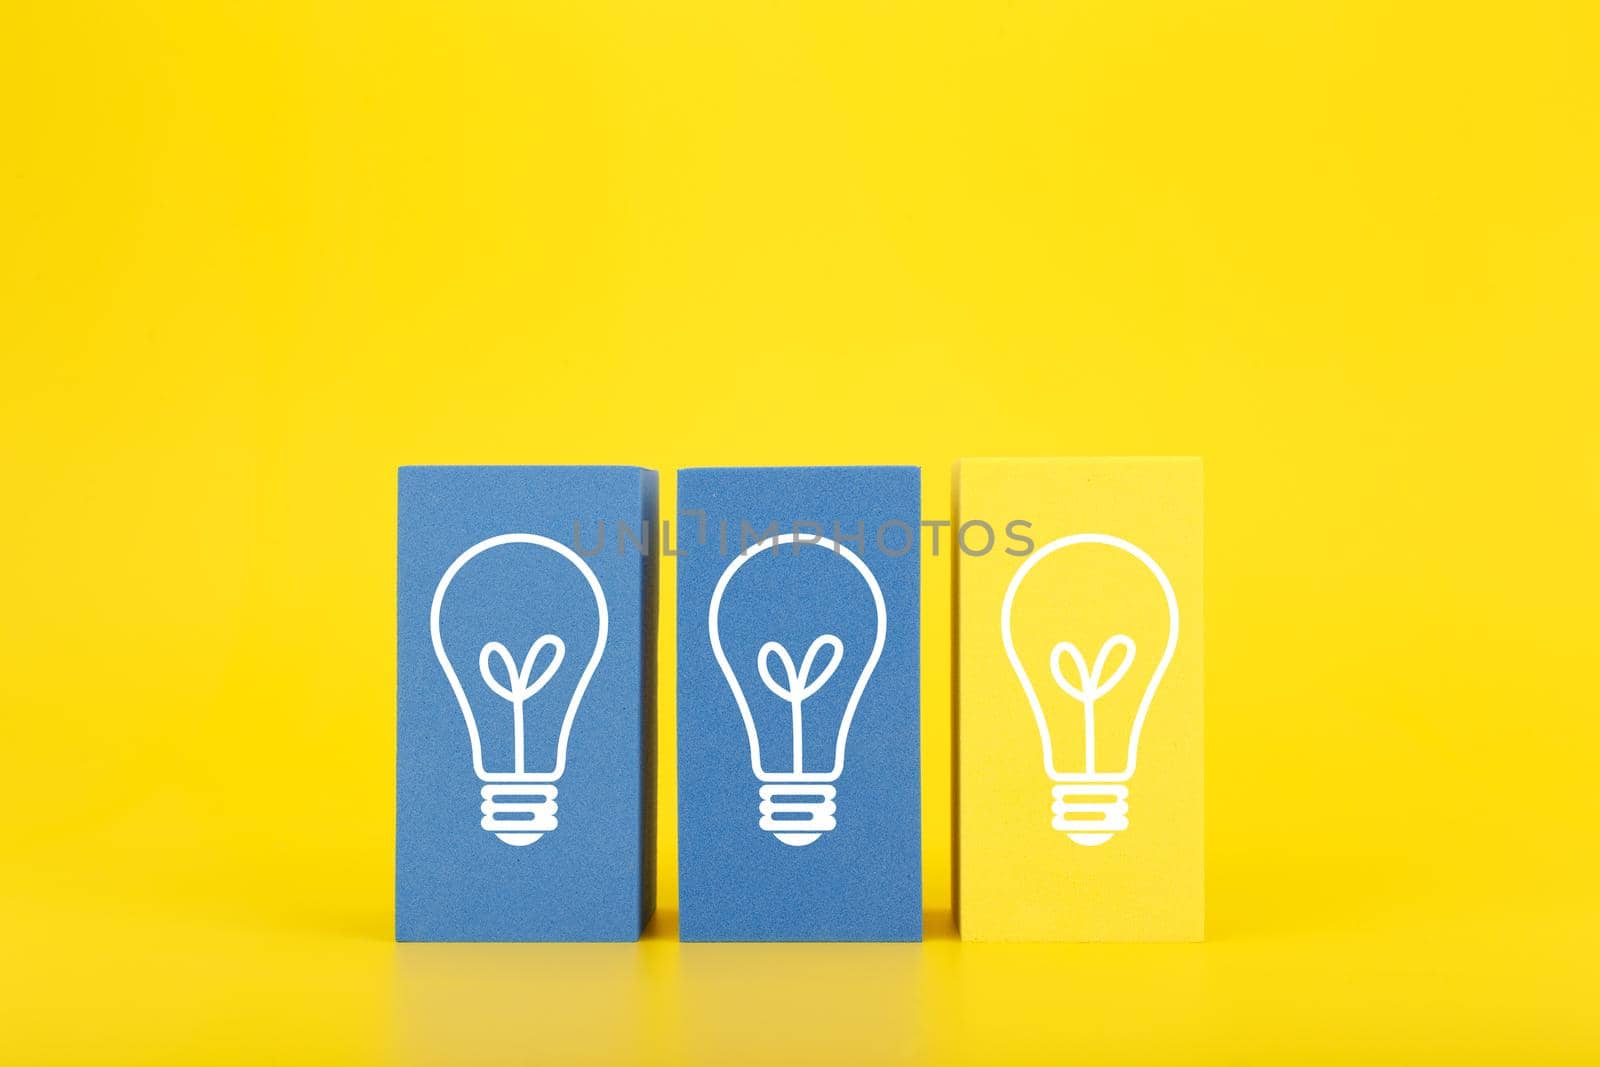 Concept of idea, creativity, start up or brainstorming. White drawn bulbs on blue and yellow rectangles in a row against bright yellow background